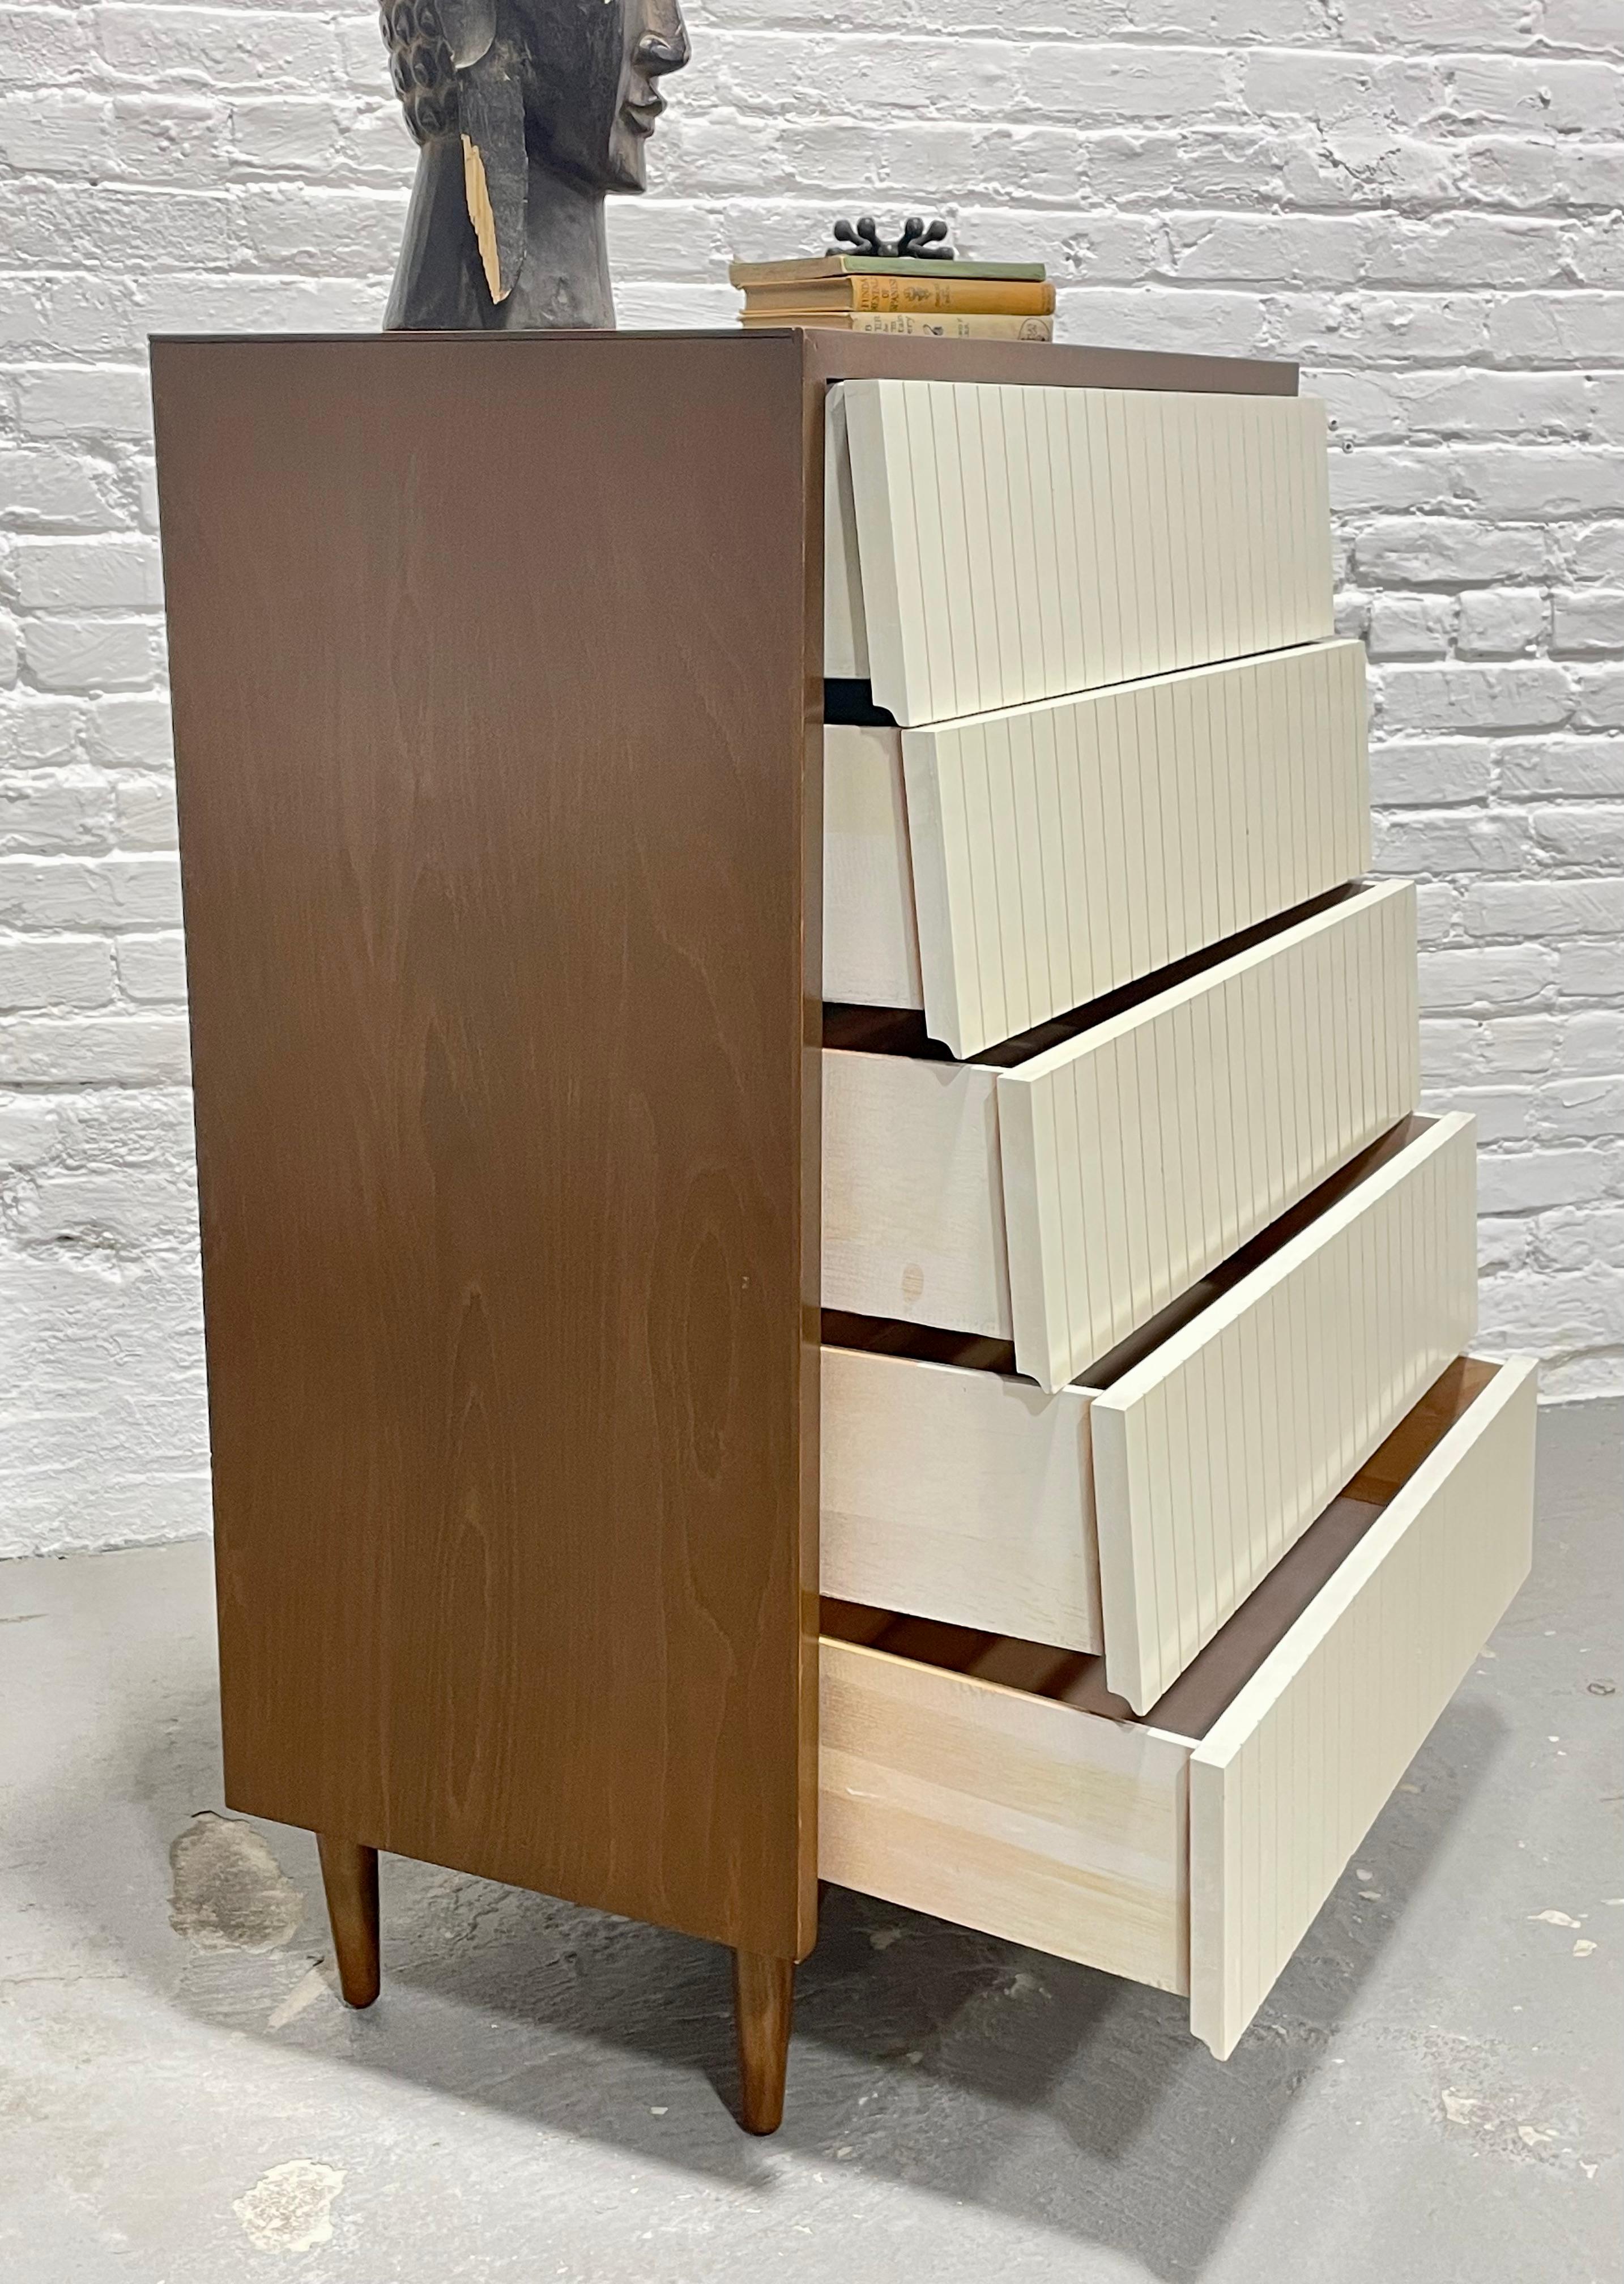 Midcentury Walnut + White Bedroom Set by Lawrence Peabody for Child Craft In Good Condition For Sale In Weehawken, NJ